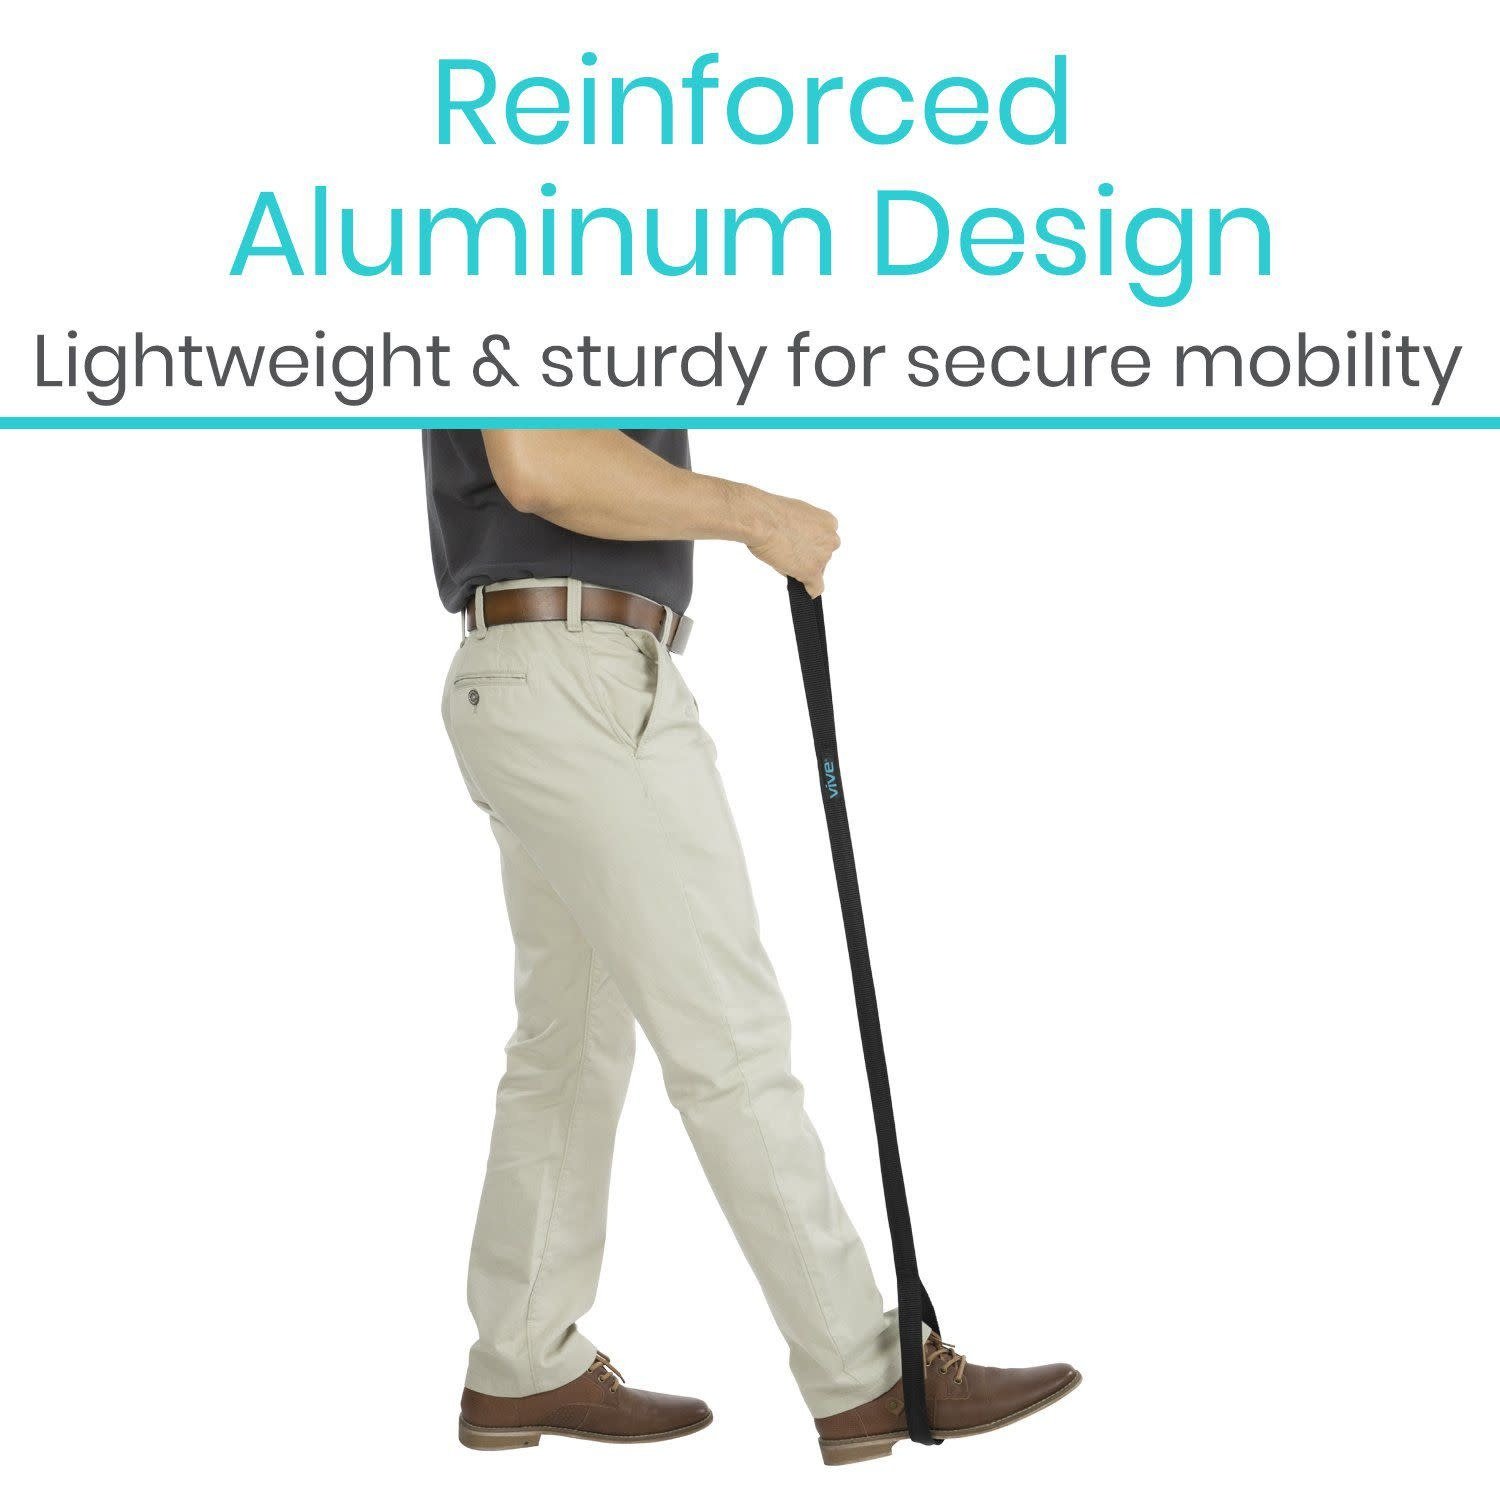 DMI Leg Lifter Strap helps Increase Mobility and Maneuverability on  Injured